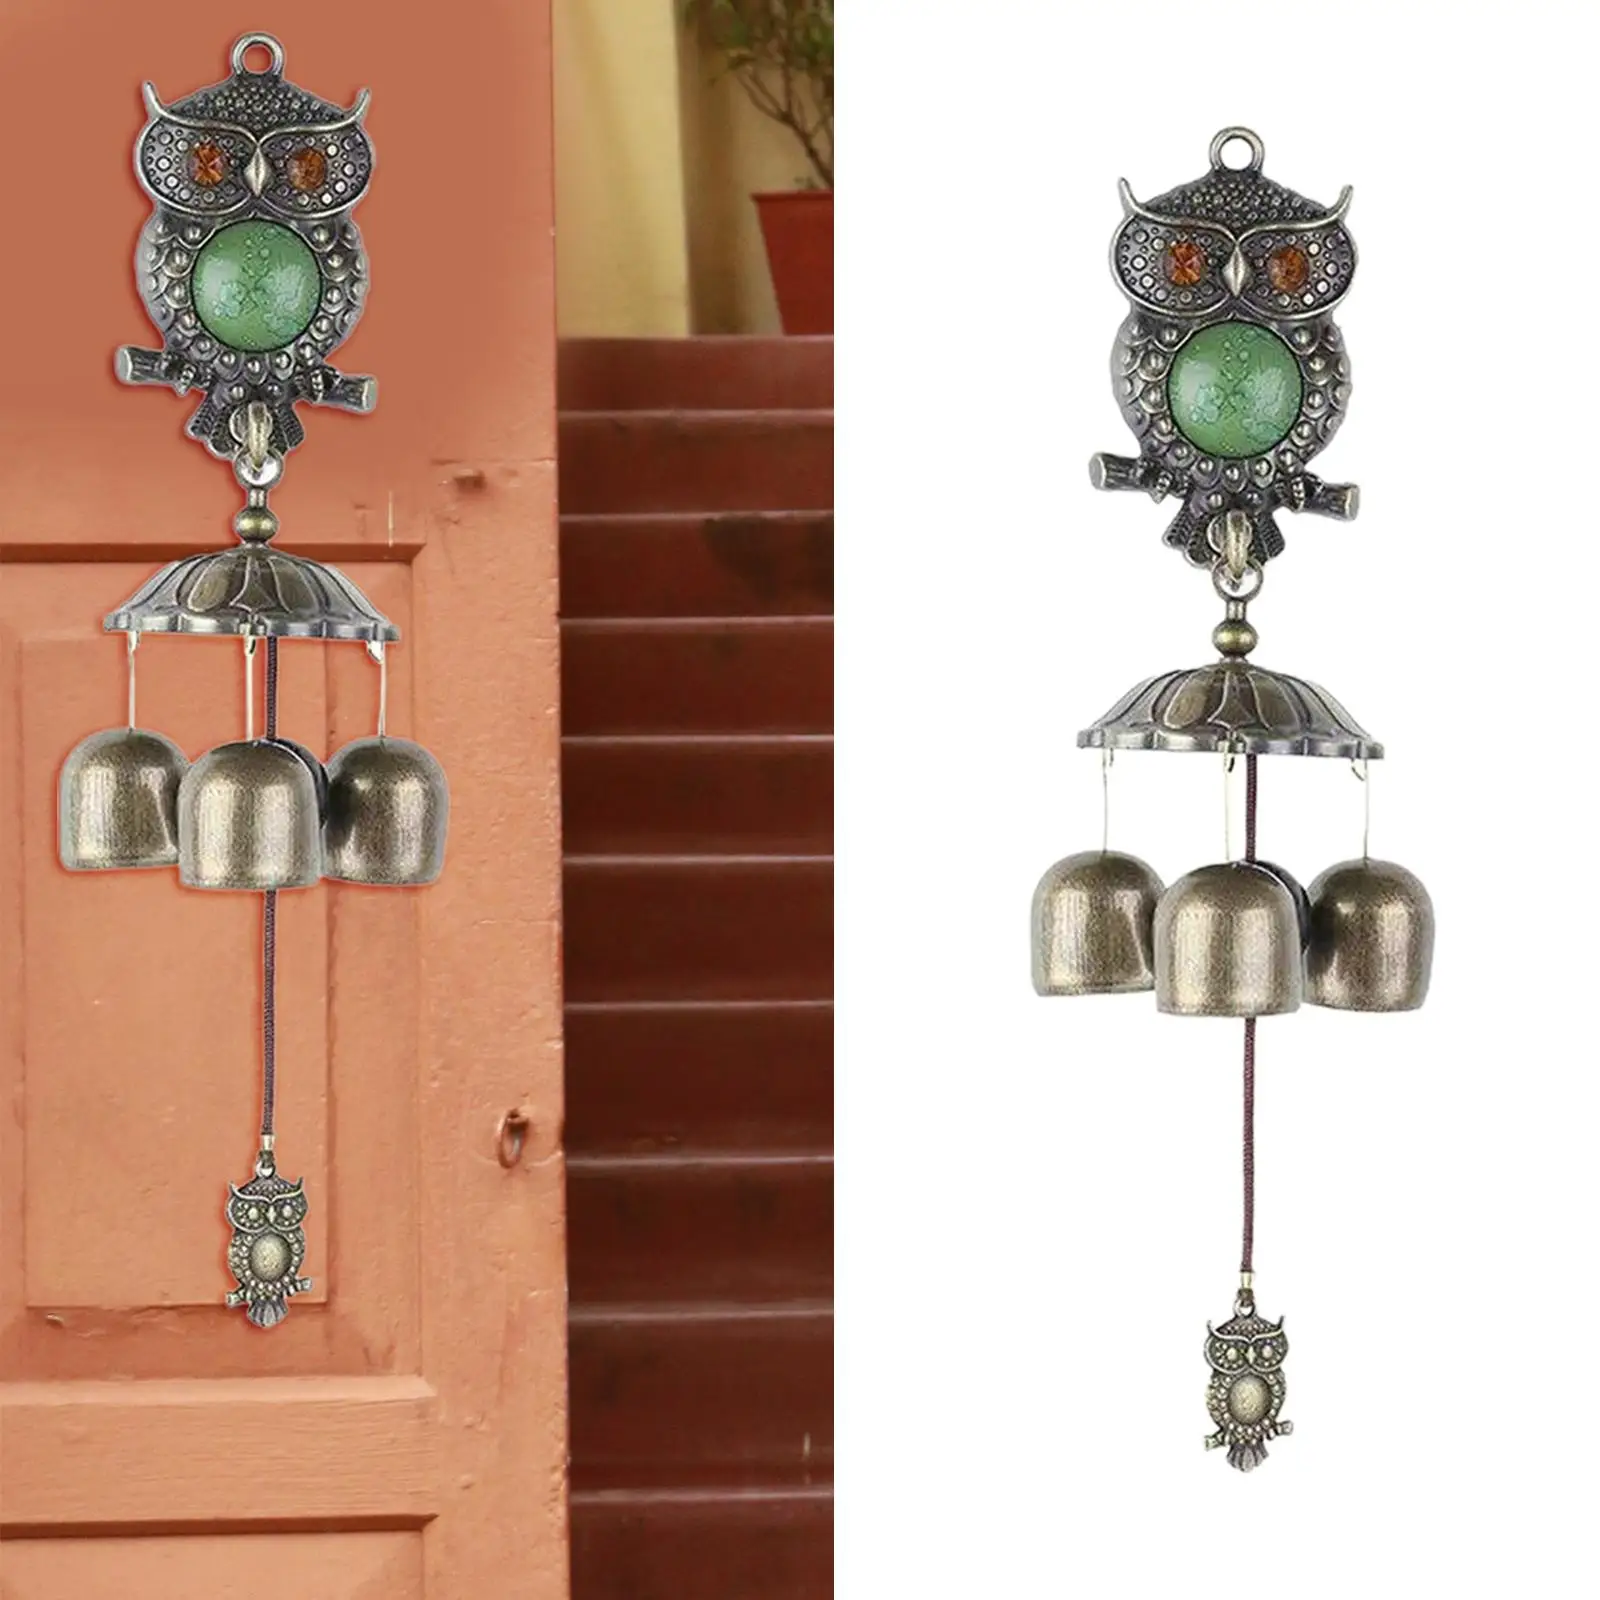 Owl Wind Chimes Decoration Ornaments Garden Hanging Wind Chimes Outdoor Bell Traditional Unique for Patio Gift Door Garden